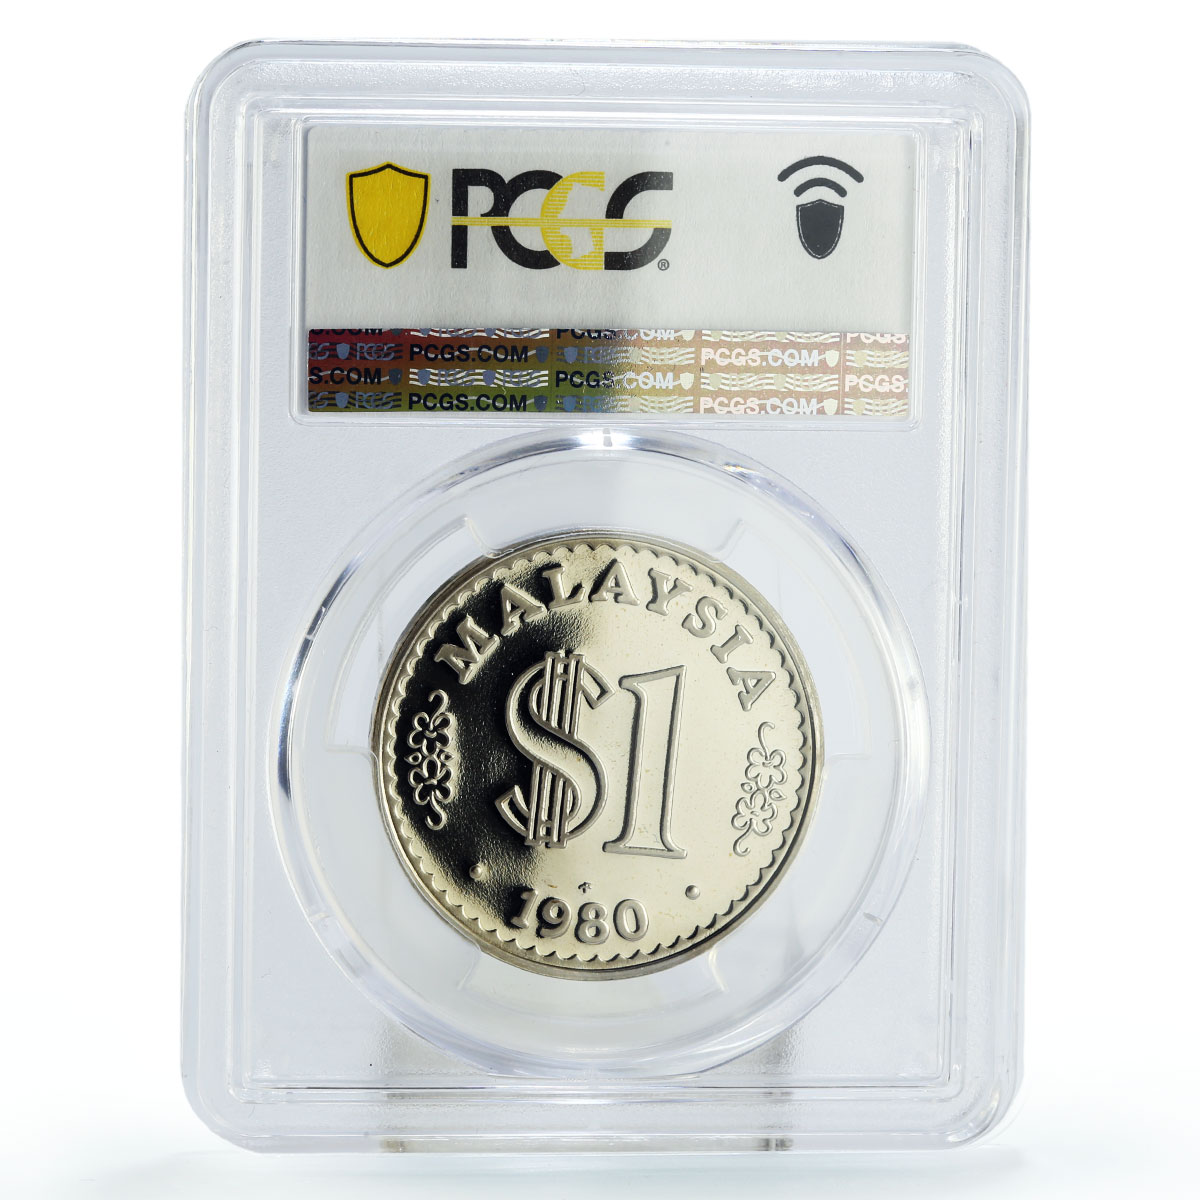 Malaysia 1 ringgit State Coinage Parliament House KM-9.1 PR69 PCGS Ni coin 1980